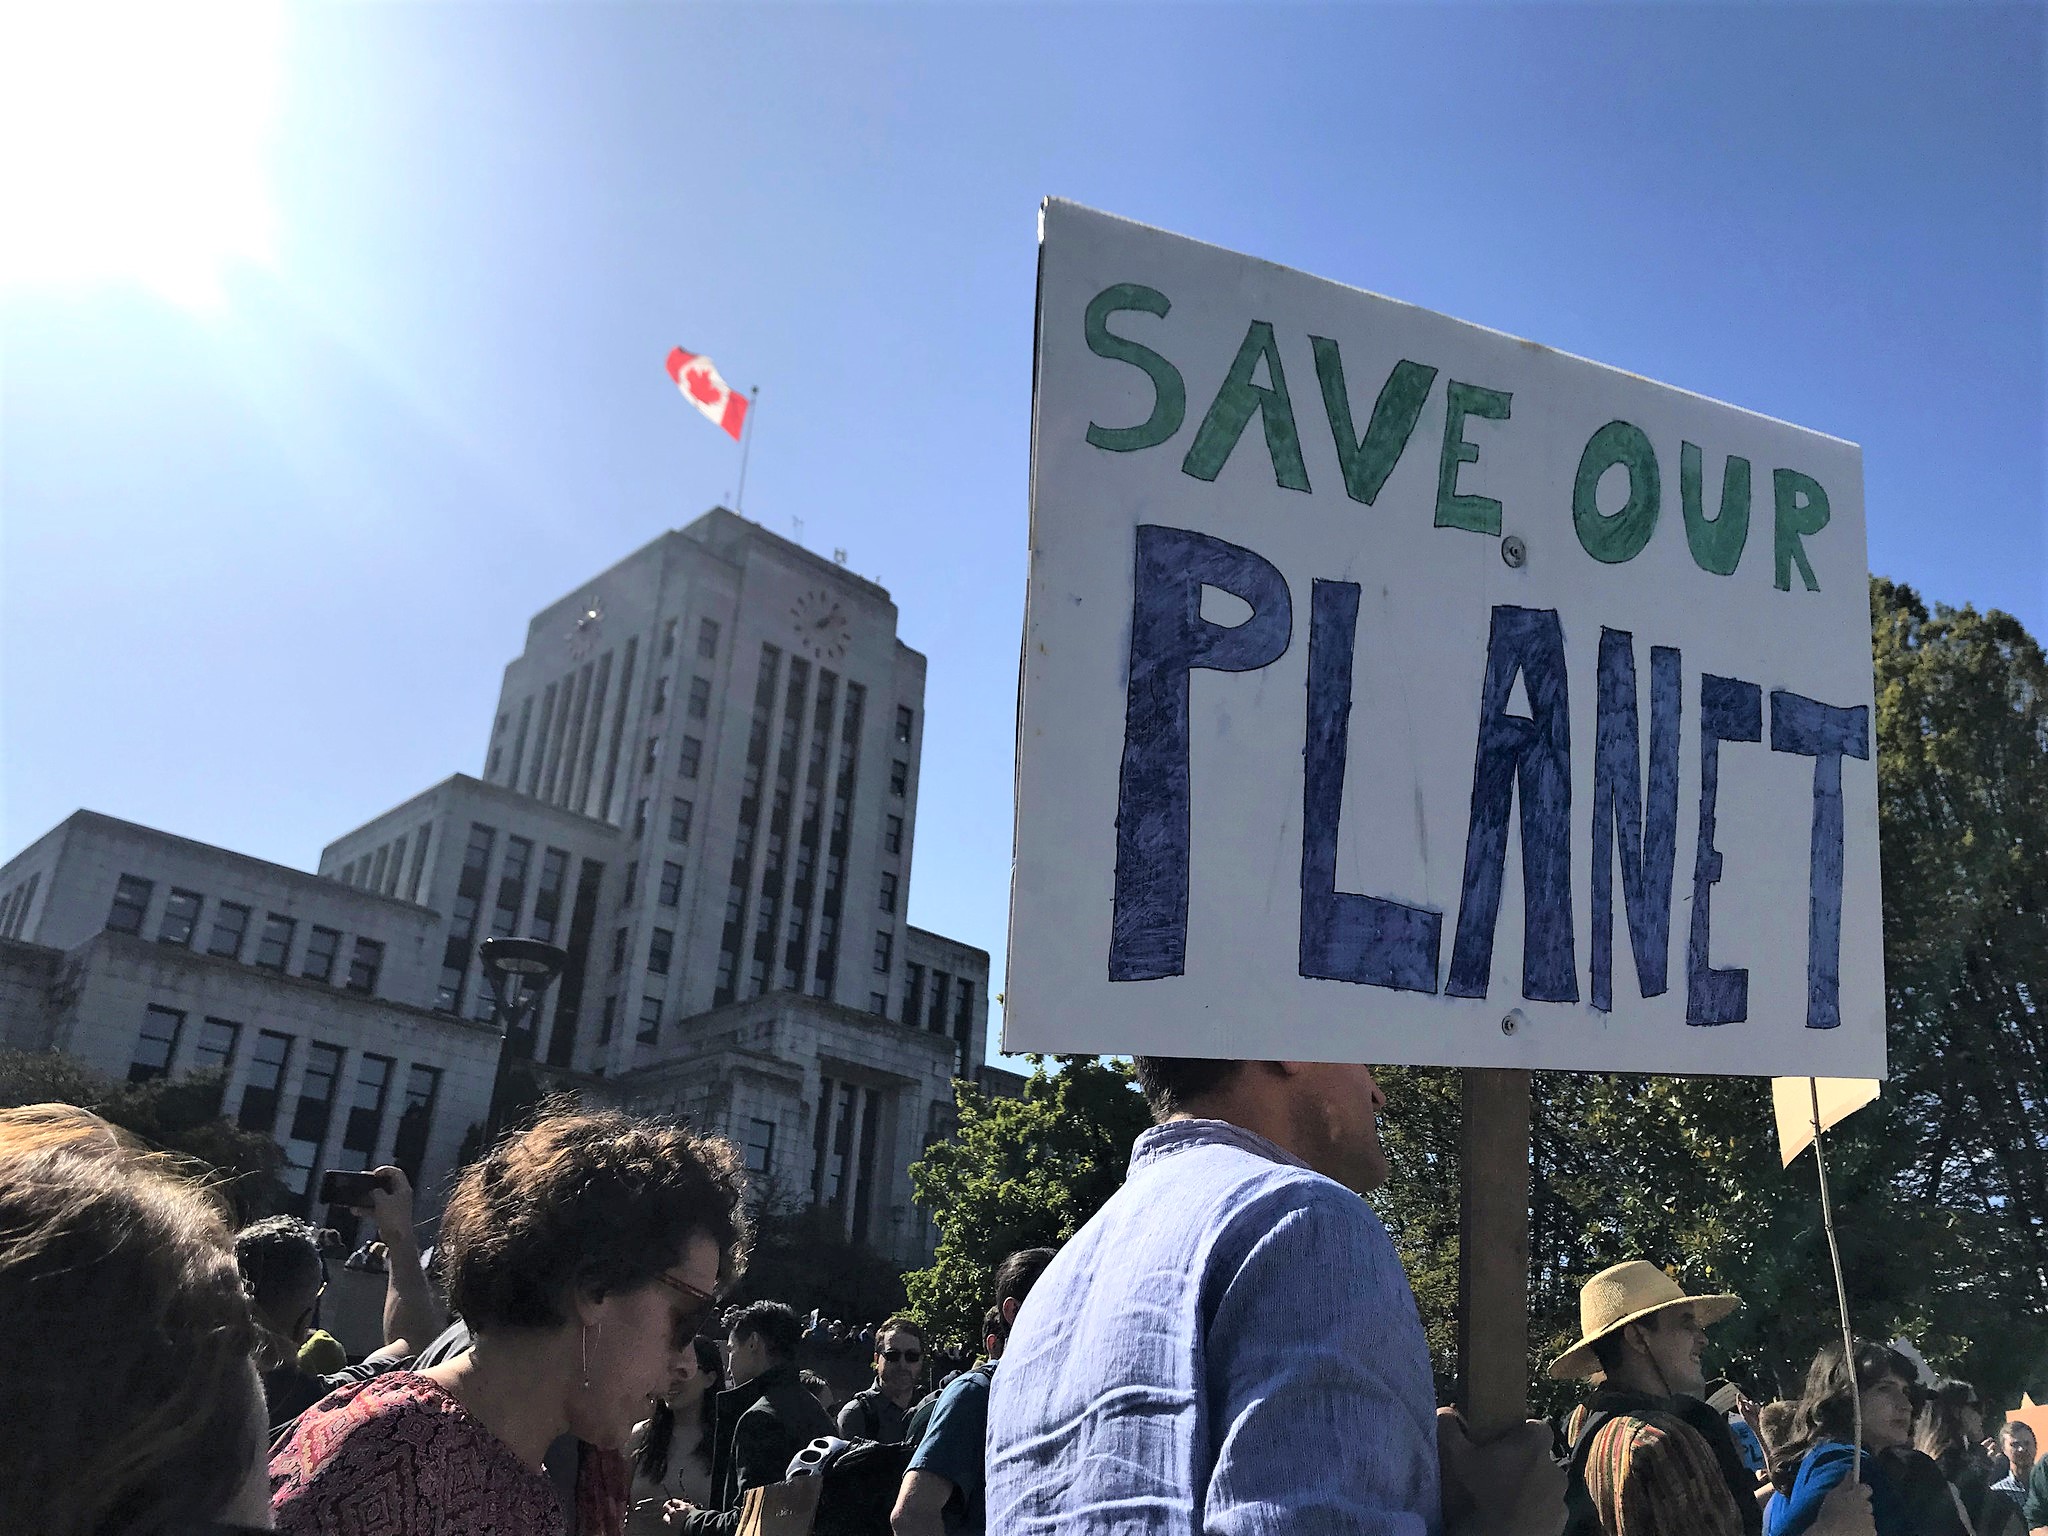 Person carrying "Save our Planet" sign in front of Vancouver City Hall